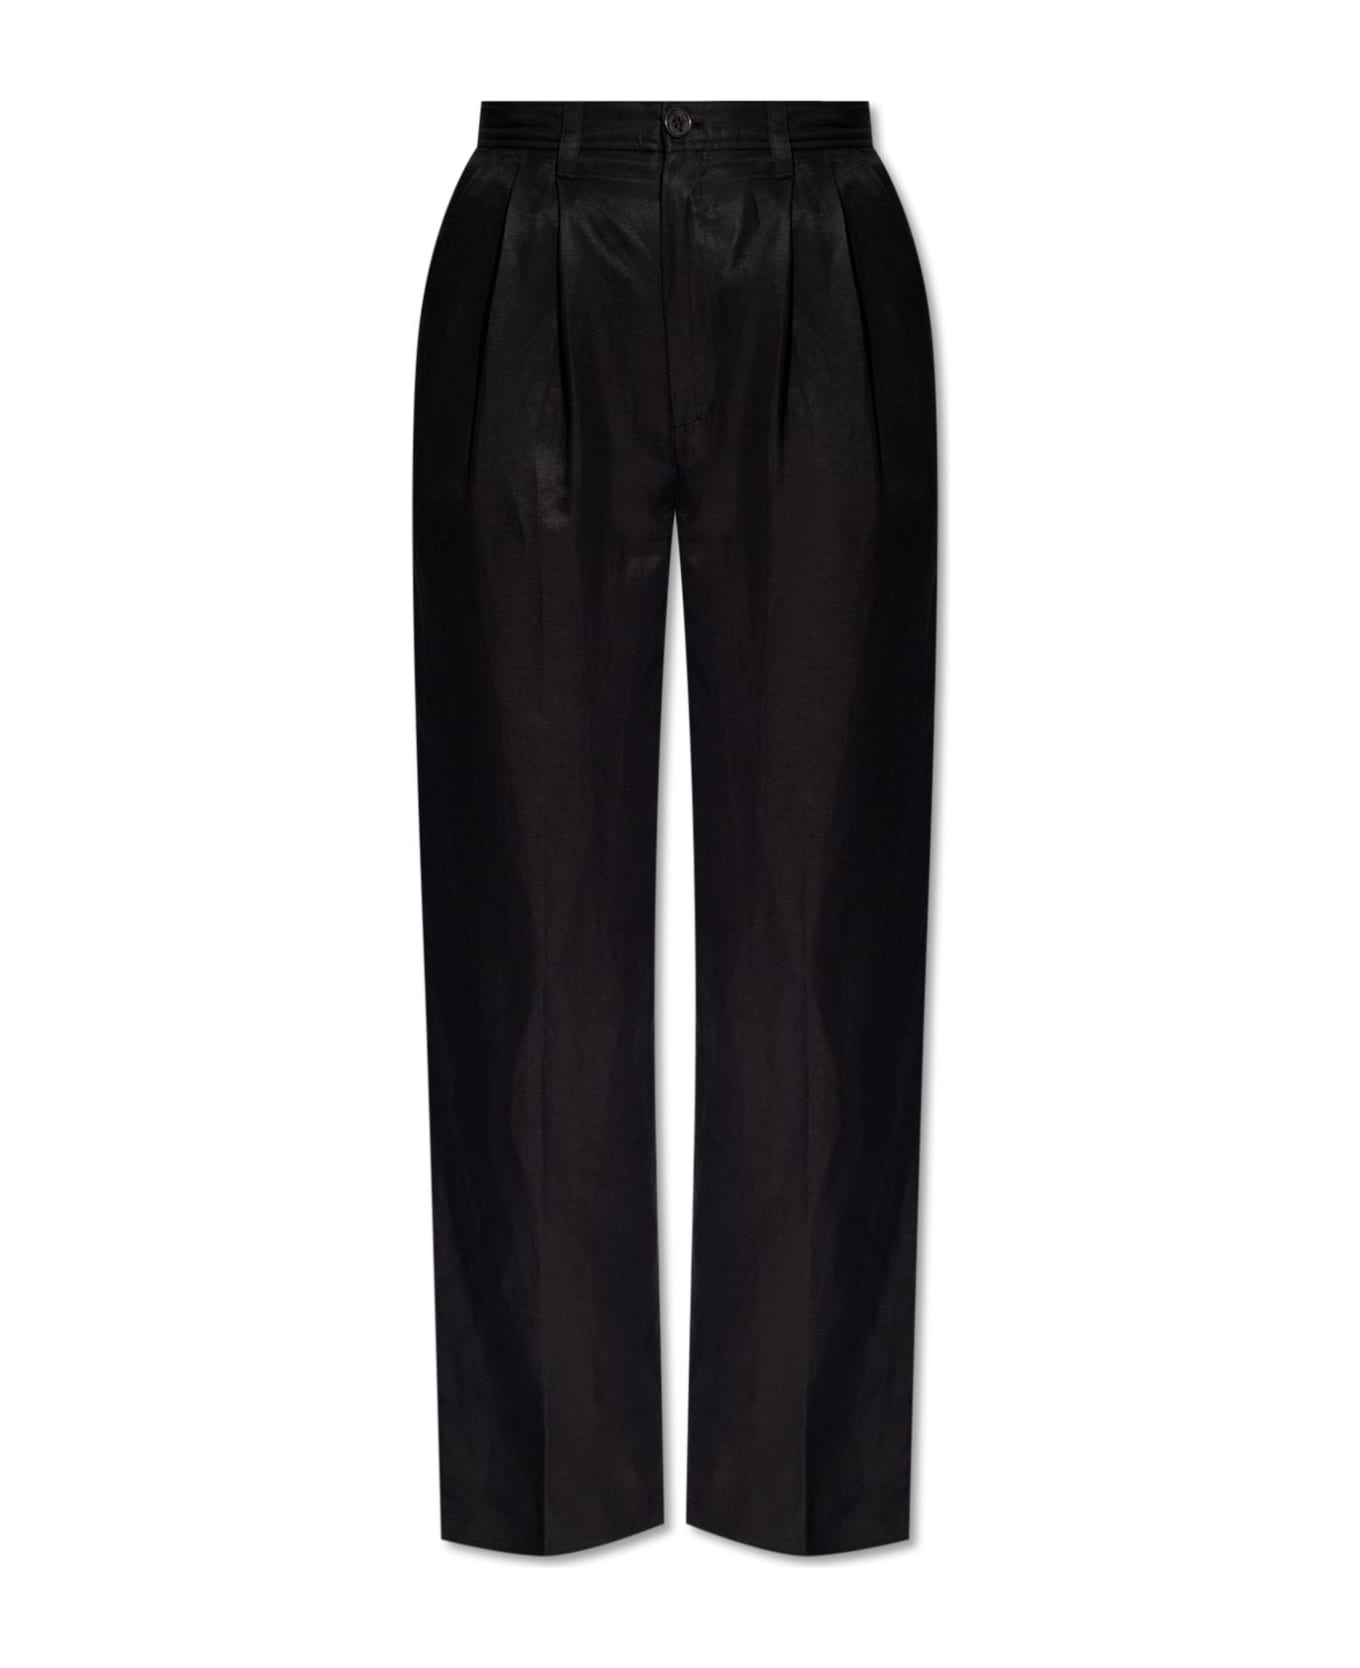 Anine Bing 'carrie' High-waisted Trousers - Black